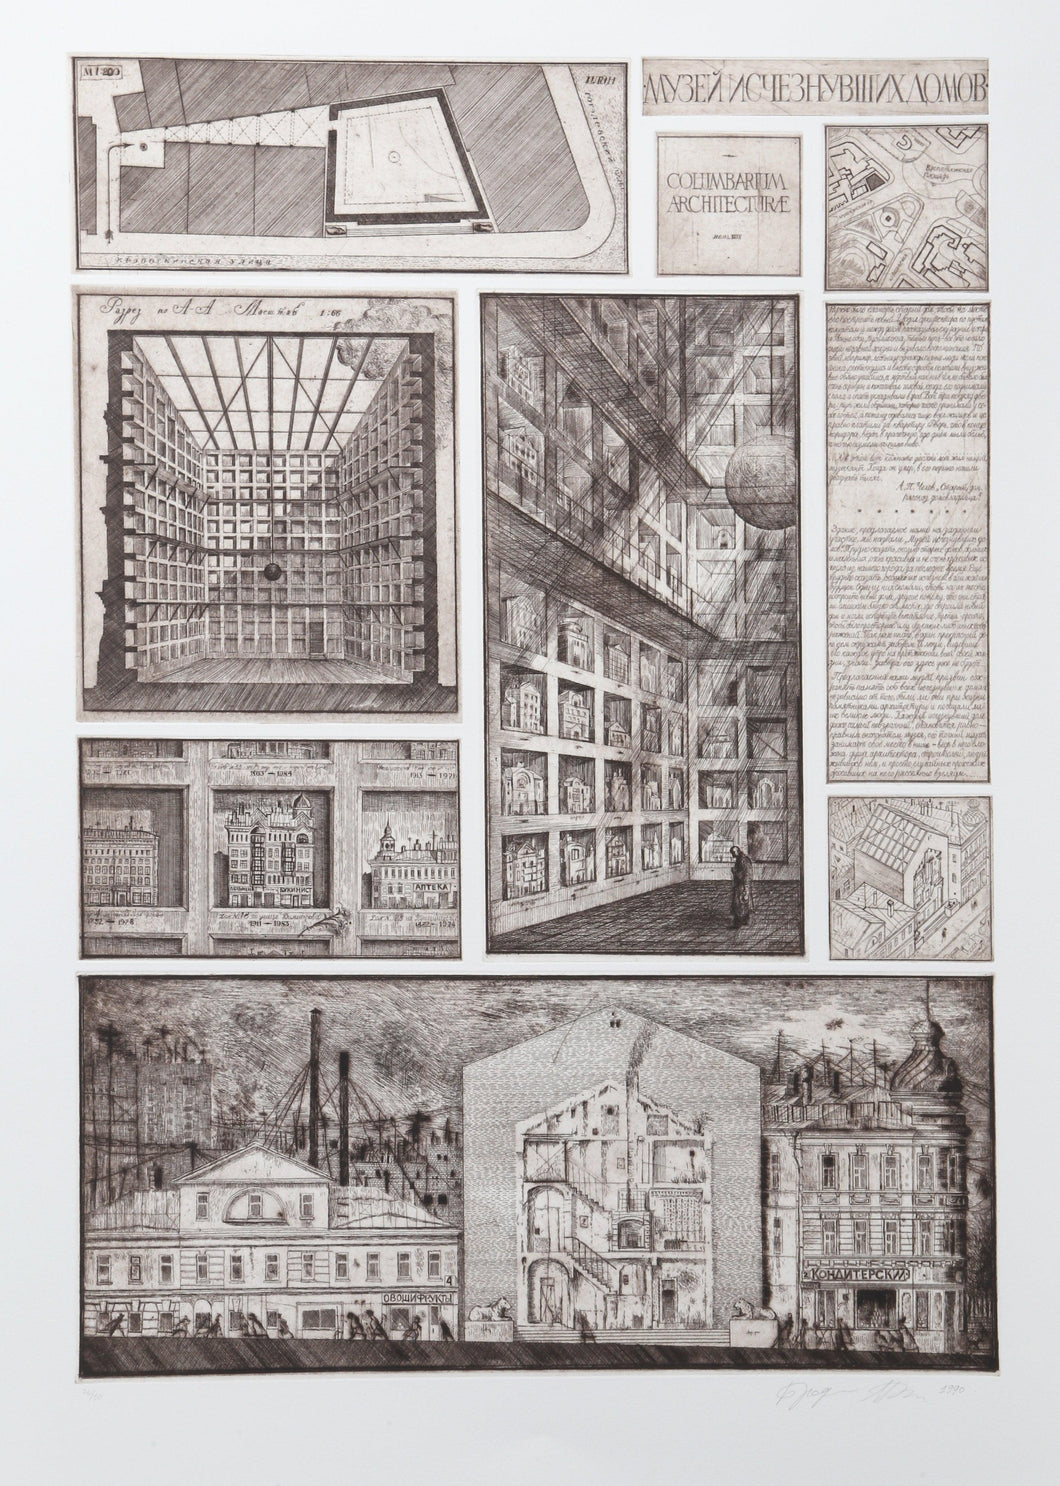 Columbarium Architecture from Brodsky and Utkin: Projects 1981 - 1990 Etching | Alexander Brodsky and Ilya Utkin,{{product.type}}